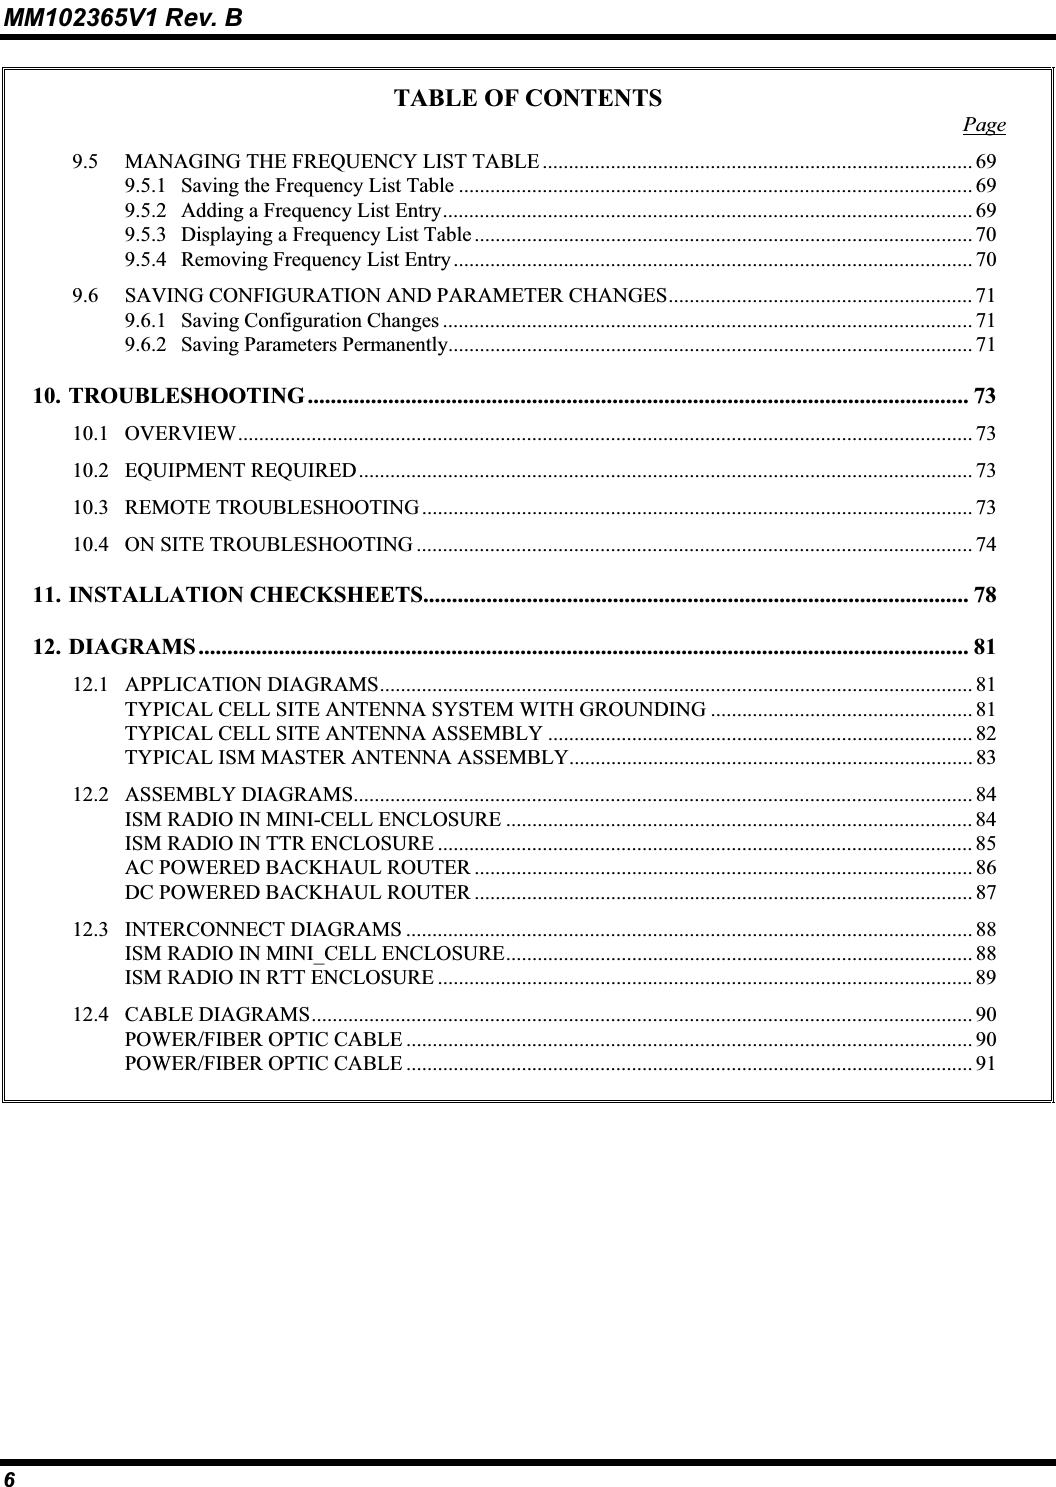 MM102365V1 Rev. B TABLE OF CONTENTS Page9.5 MANAGING THE FREQUENCY LIST TABLE .................................................................................. 699.5.1 Saving the Frequency List Table .................................................................................................. 699.5.2 Adding a Frequency List Entry..................................................................................................... 699.5.3 Displaying a Frequency List Table ............................................................................................... 709.5.4 Removing Frequency List Entry................................................................................................... 709.6 SAVING CONFIGURATION AND PARAMETER CHANGES.......................................................... 719.6.1 Saving Configuration Changes ..................................................................................................... 719.6.2 Saving Parameters Permanently.................................................................................................... 7110. TROUBLESHOOTING ................................................................................................................... 7310.1 OVERVIEW............................................................................................................................................ 7310.2 EQUIPMENT REQUIRED..................................................................................................................... 7310.3 REMOTE TROUBLESHOOTING ......................................................................................................... 7310.4 ON SITE TROUBLESHOOTING .......................................................................................................... 7411. INSTALLATION CHECKSHEETS............................................................................................... 7812. DIAGRAMS ...................................................................................................................................... 8112.1 APPLICATION DIAGRAMS................................................................................................................. 81TYPICAL CELL SITE ANTENNA SYSTEM WITH GROUNDING .................................................. 81TYPICAL CELL SITE ANTENNA ASSEMBLY ................................................................................. 82TYPICAL ISM MASTER ANTENNA ASSEMBLY............................................................................. 8312.2 ASSEMBLY DIAGRAMS...................................................................................................................... 84ISM RADIO IN MINI-CELL ENCLOSURE ......................................................................................... 84ISM RADIO IN TTR ENCLOSURE ......................................................................................................85AC POWERED BACKHAUL ROUTER ............................................................................................... 86DC POWERED BACKHAUL ROUTER ............................................................................................... 8712.3 INTERCONNECT DIAGRAMS ............................................................................................................ 88ISM RADIO IN MINI_CELL ENCLOSURE......................................................................................... 88ISM RADIO IN RTT ENCLOSURE ......................................................................................................8912.4 CABLE DIAGRAMS.............................................................................................................................. 90POWER/FIBER OPTIC CABLE ............................................................................................................ 90POWER/FIBER OPTIC CABLE ............................................................................................................ 916